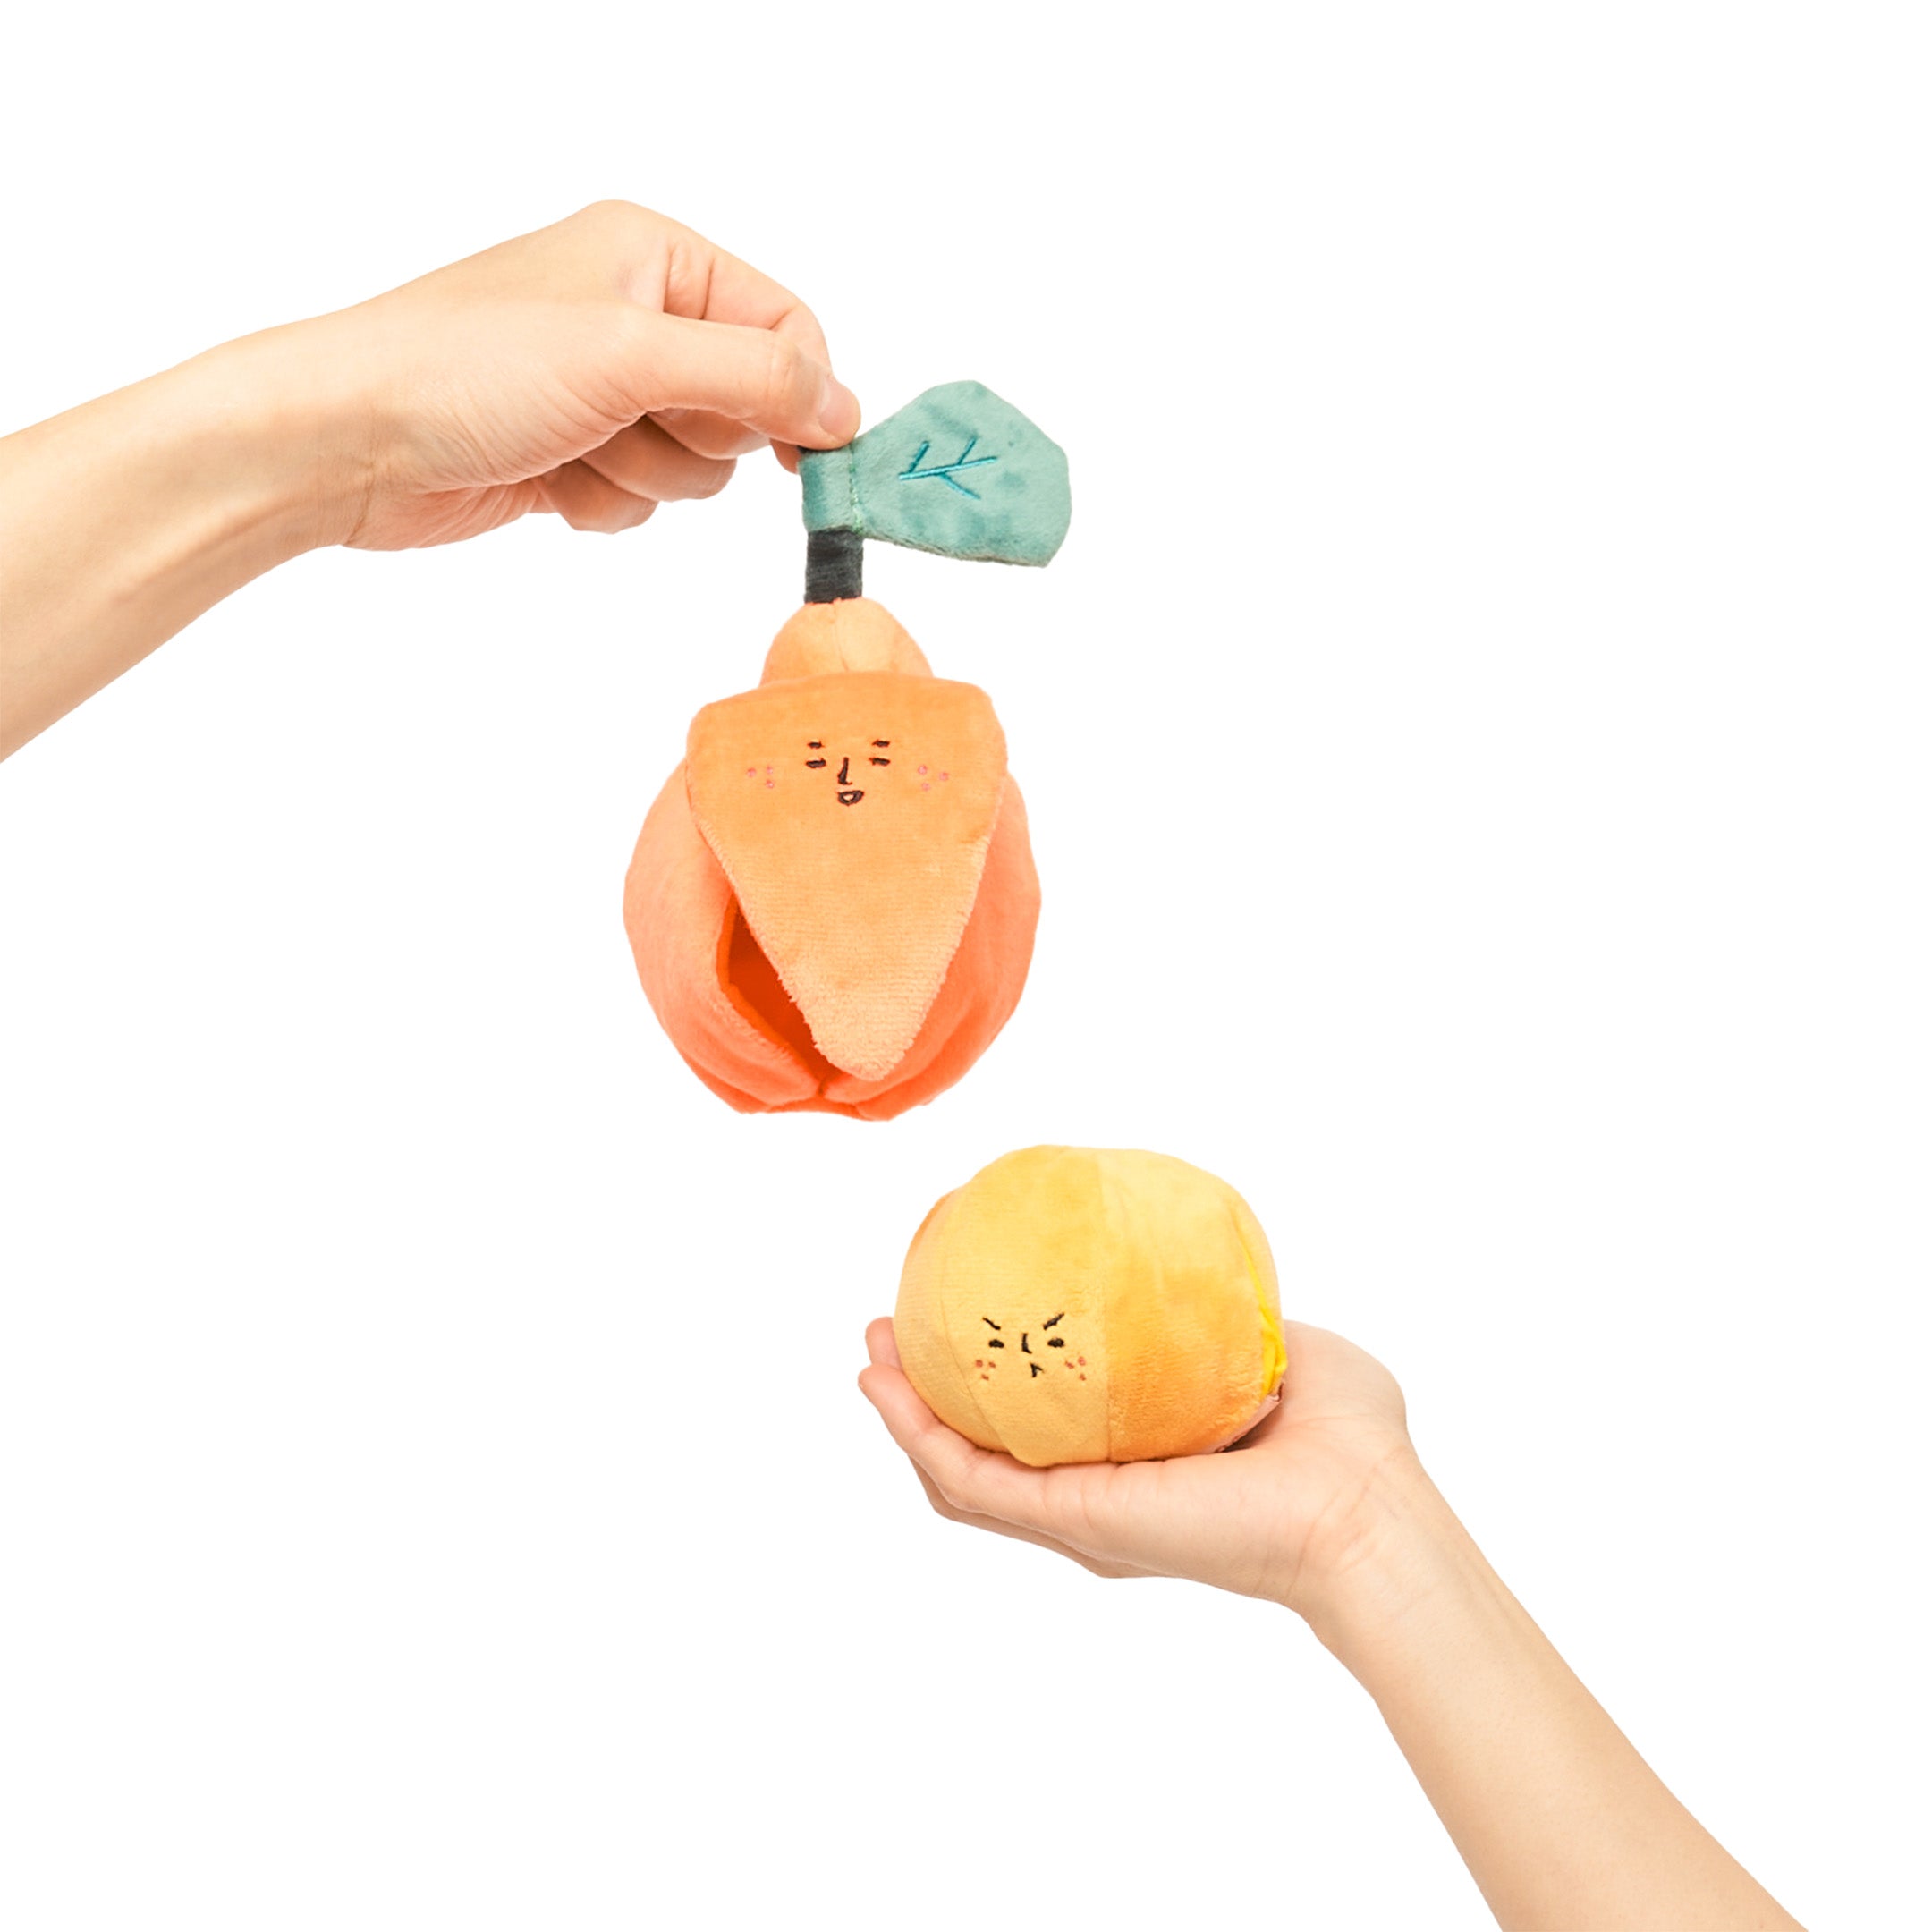 Two hands holding parts of an orange-shaped dog toy; one hand holds the top with the teal stem, and the other hand holds the bottom part, on a white background.